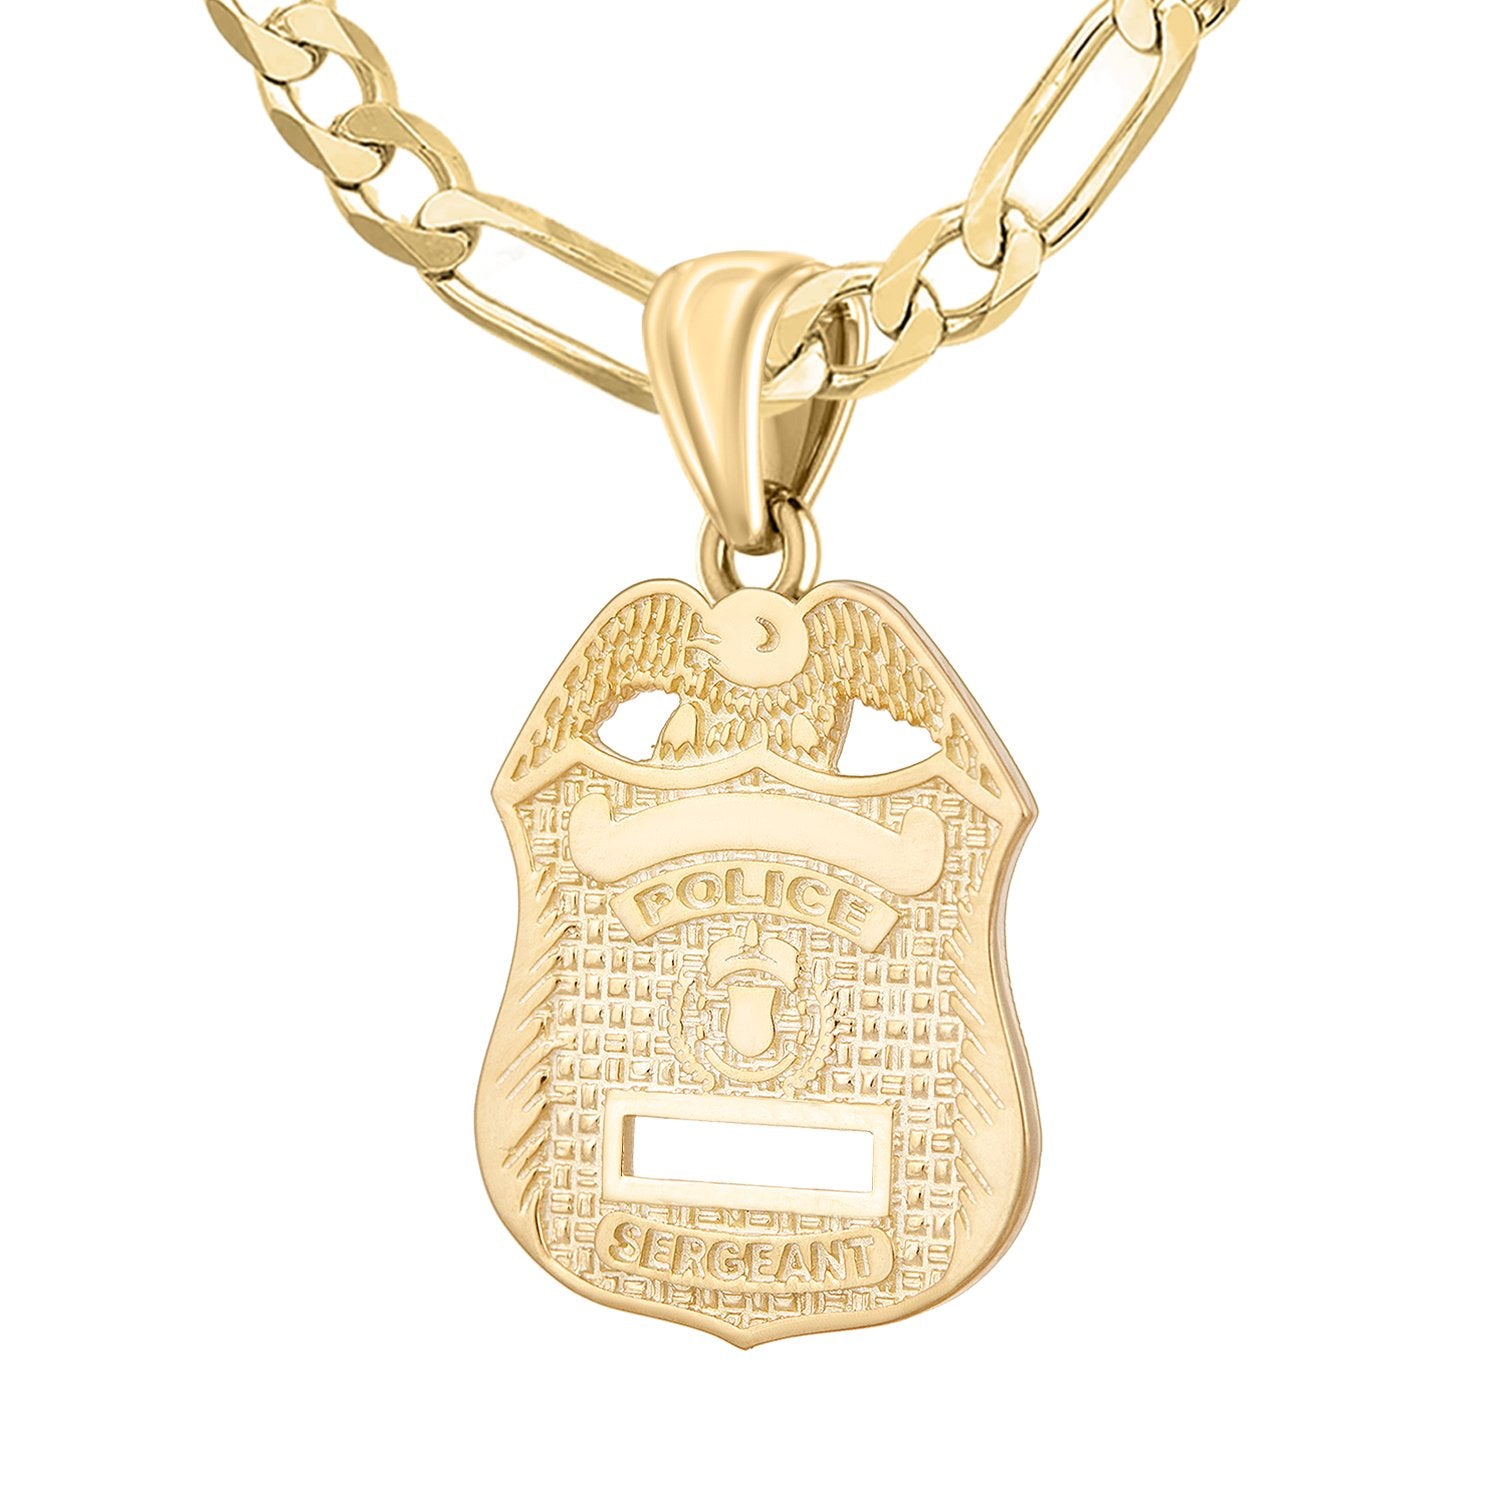 Police Badge Necklace In Gold For Men - 4.4mm Figaro Chain